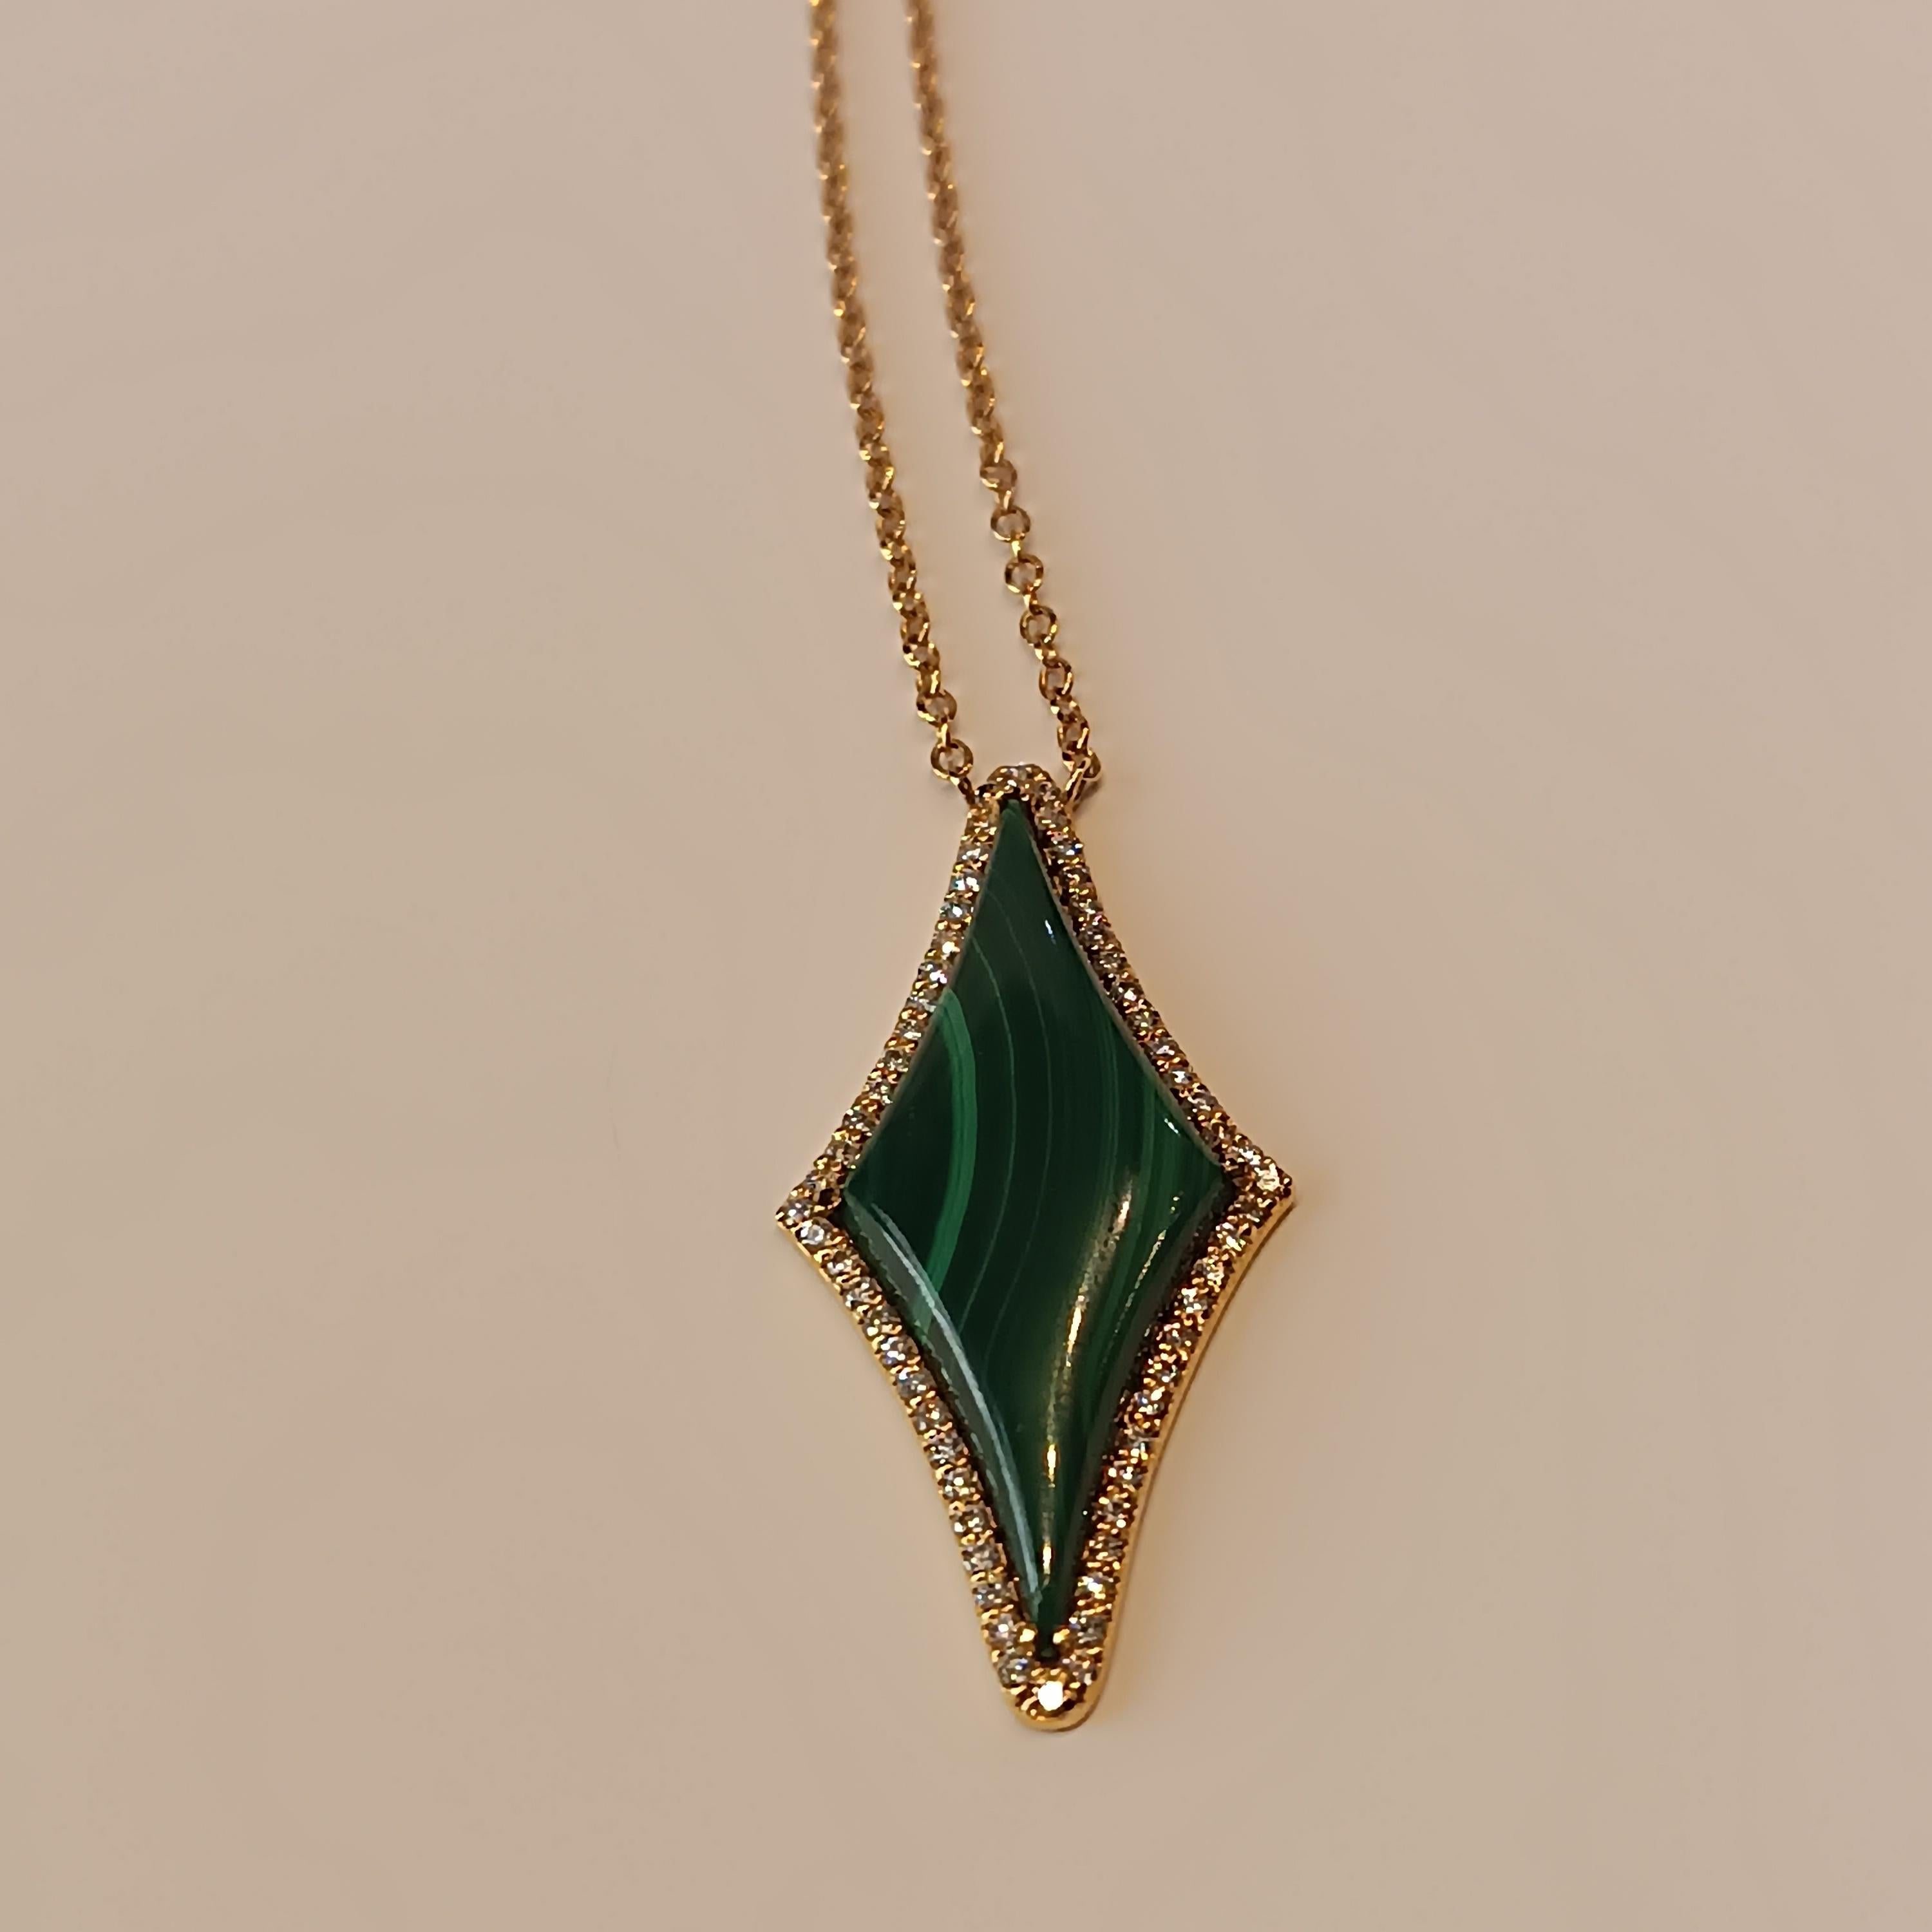 This wonderful Leo Milano pendant from our Brera  collection shows in every detail a very complicate yet perfectly done workmanship. The pendant and the chain are in 18 carat rose gold with malachite . The object weights 9.03 grams the total